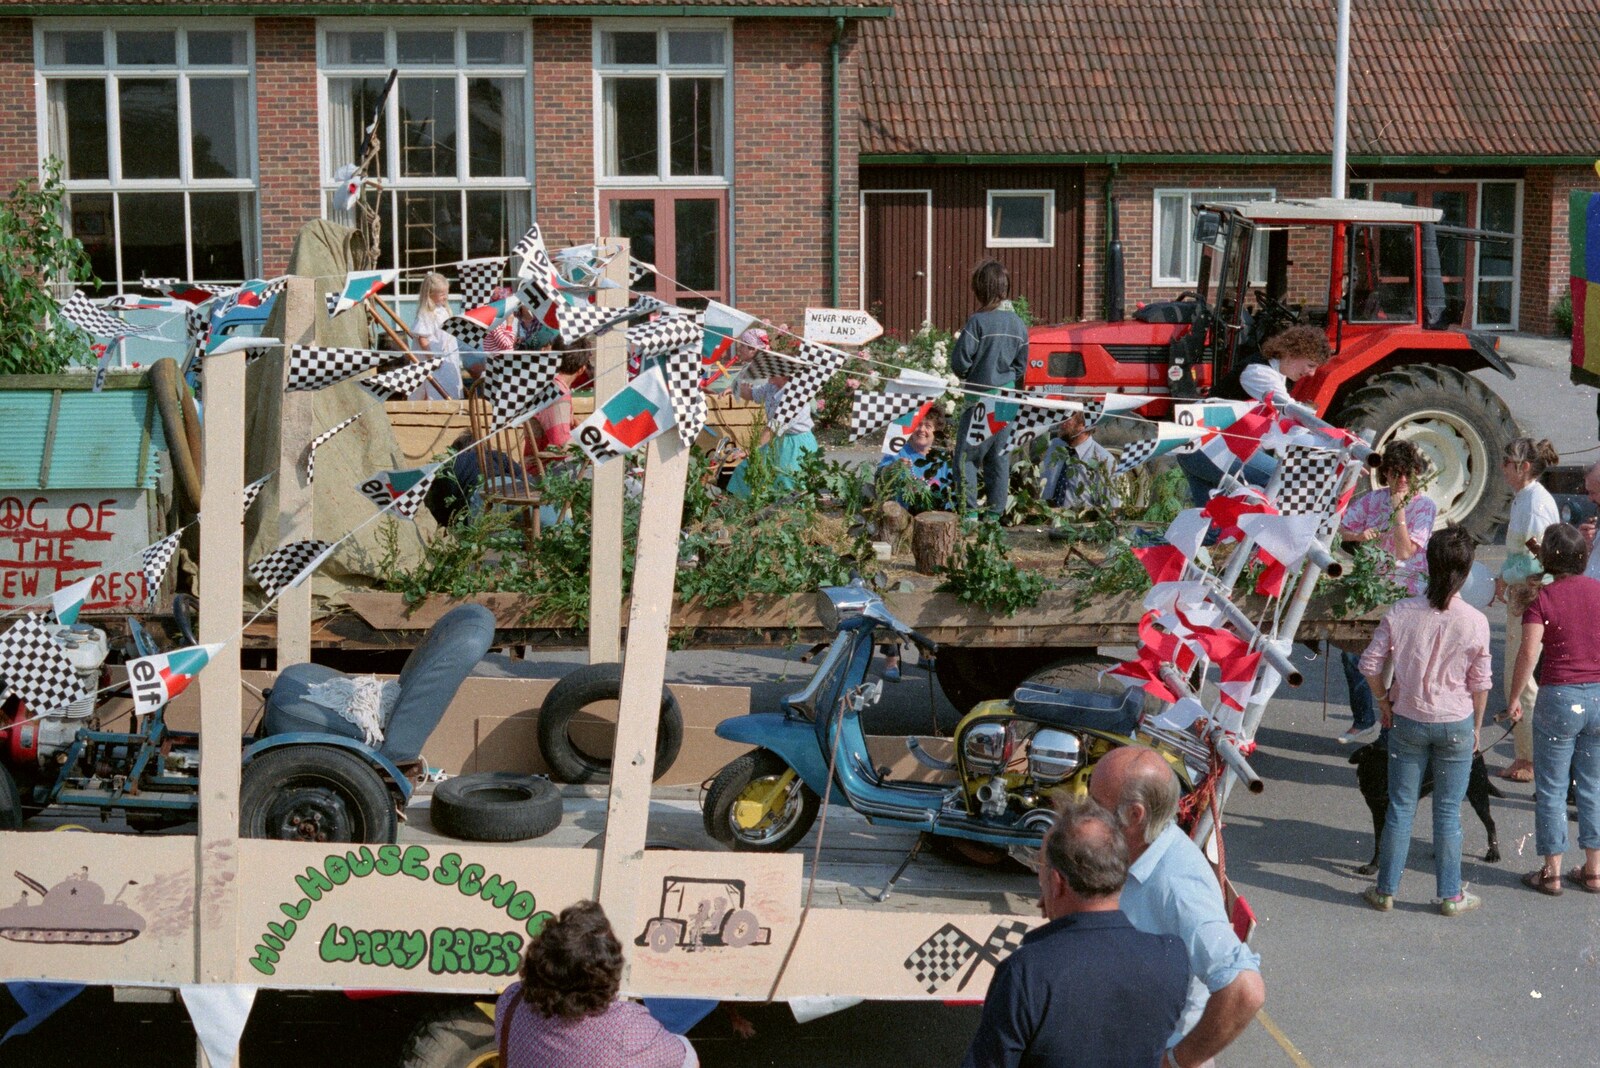 Floats outside the Junior School from Sean and the New Milton Carnival, Hampshire - 1st August 1986